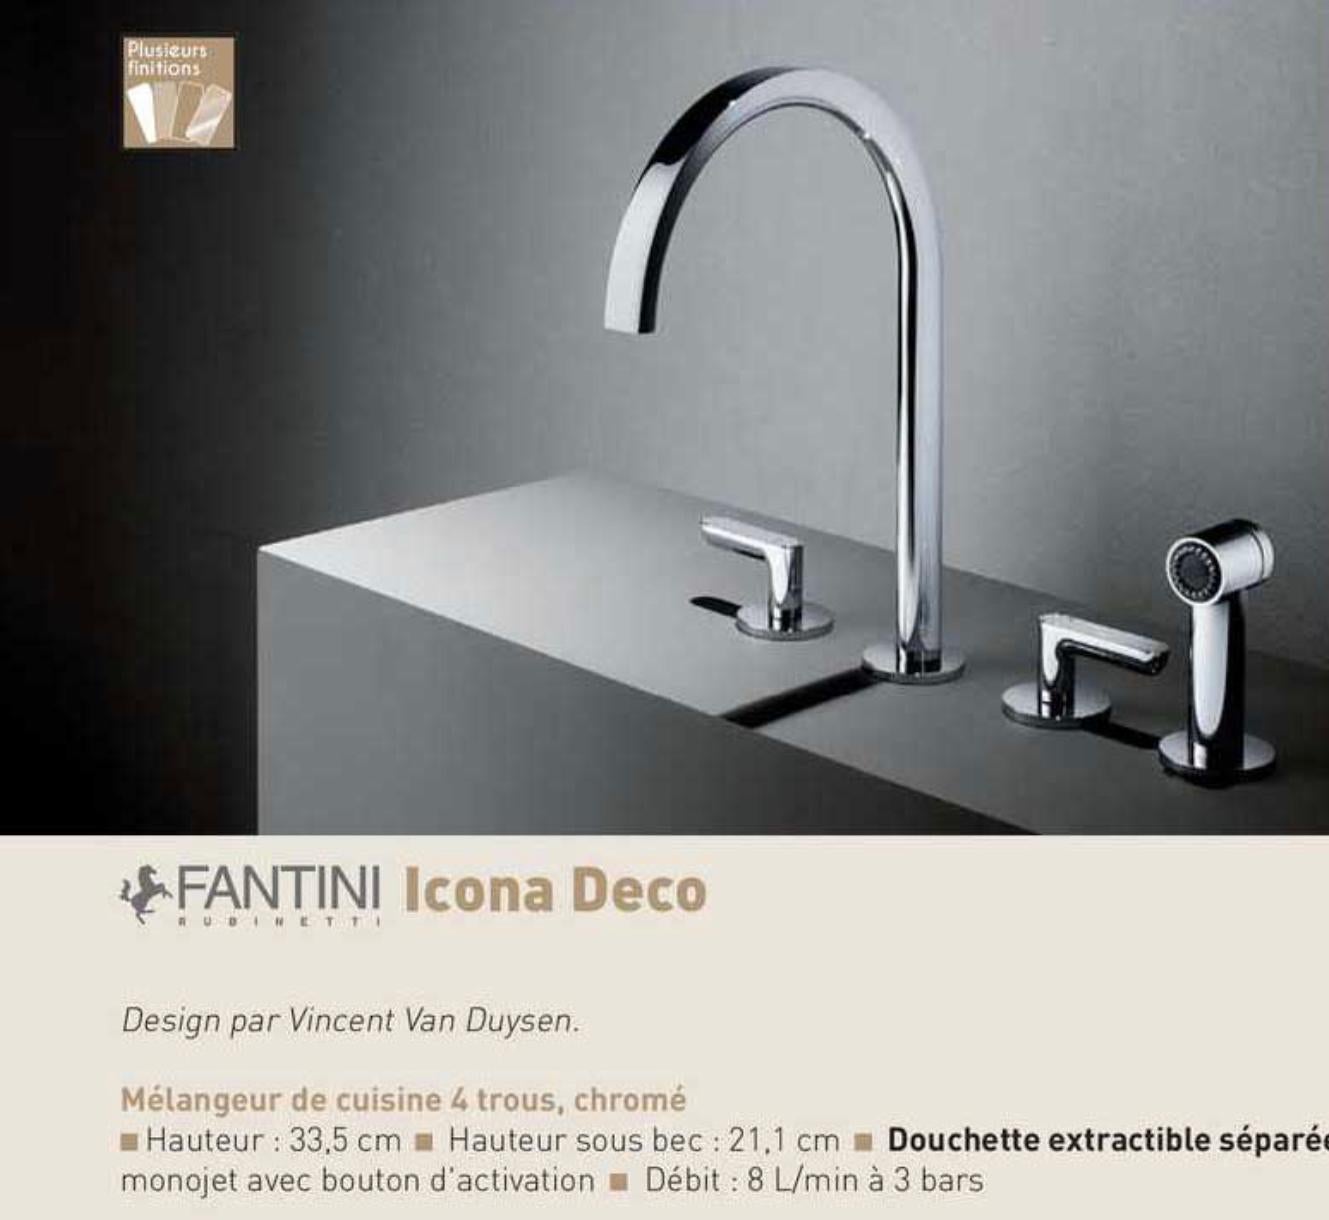 Art Deco Fantini Icona Polished Nickel 4-Hole Kitchen, Bar, Utility Mixer Faucet & Spray For Sale